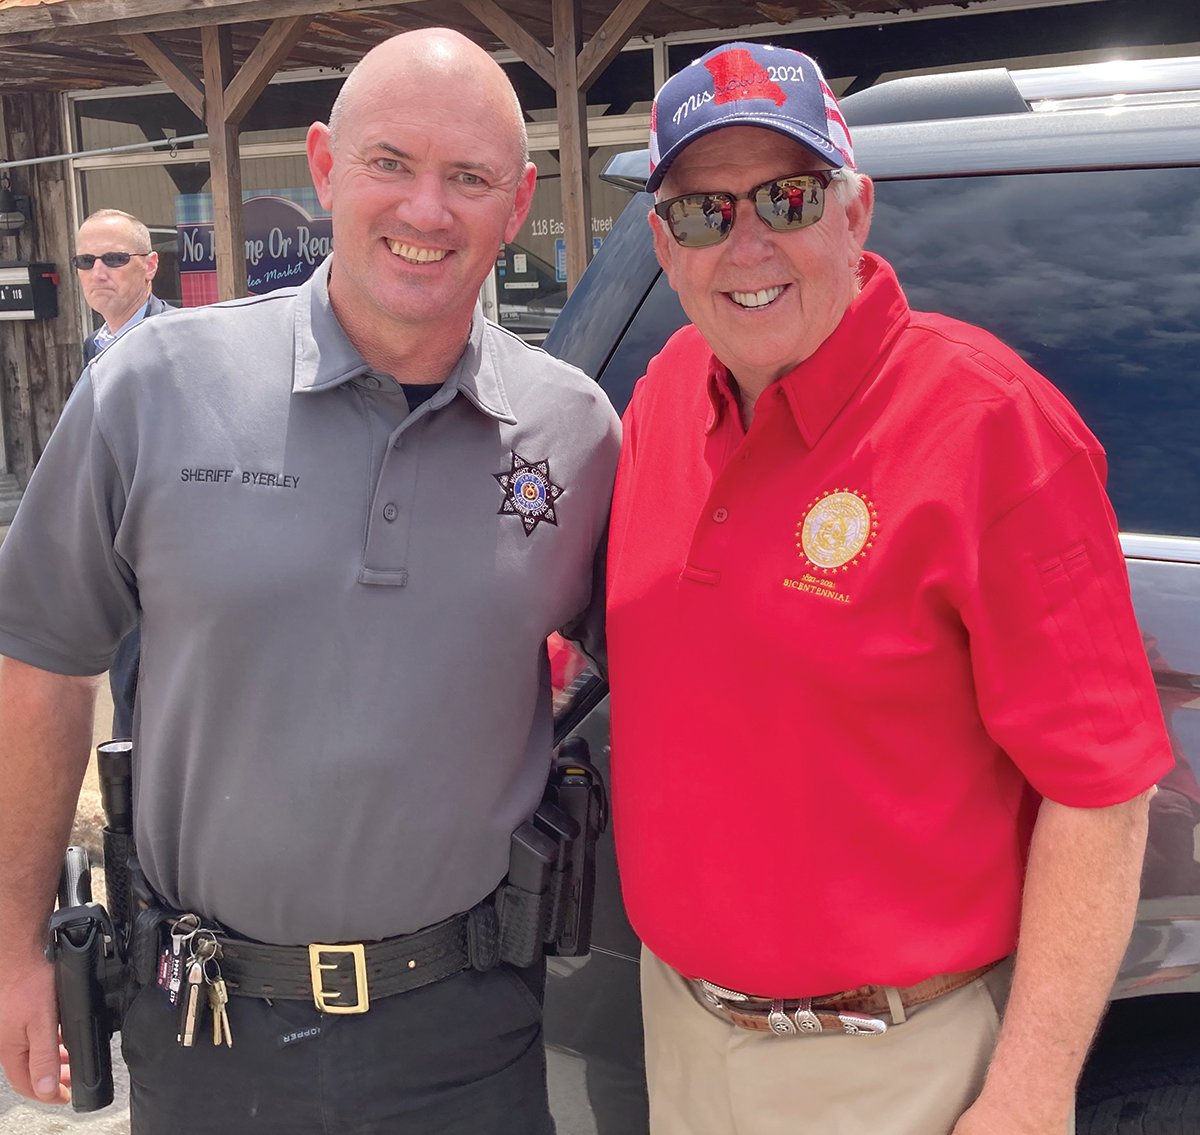 Wright County Sheriff Sonny Byerley, left, with Missouri Gov. Mike Parson during the Heritage Festival in Mountain Grove.